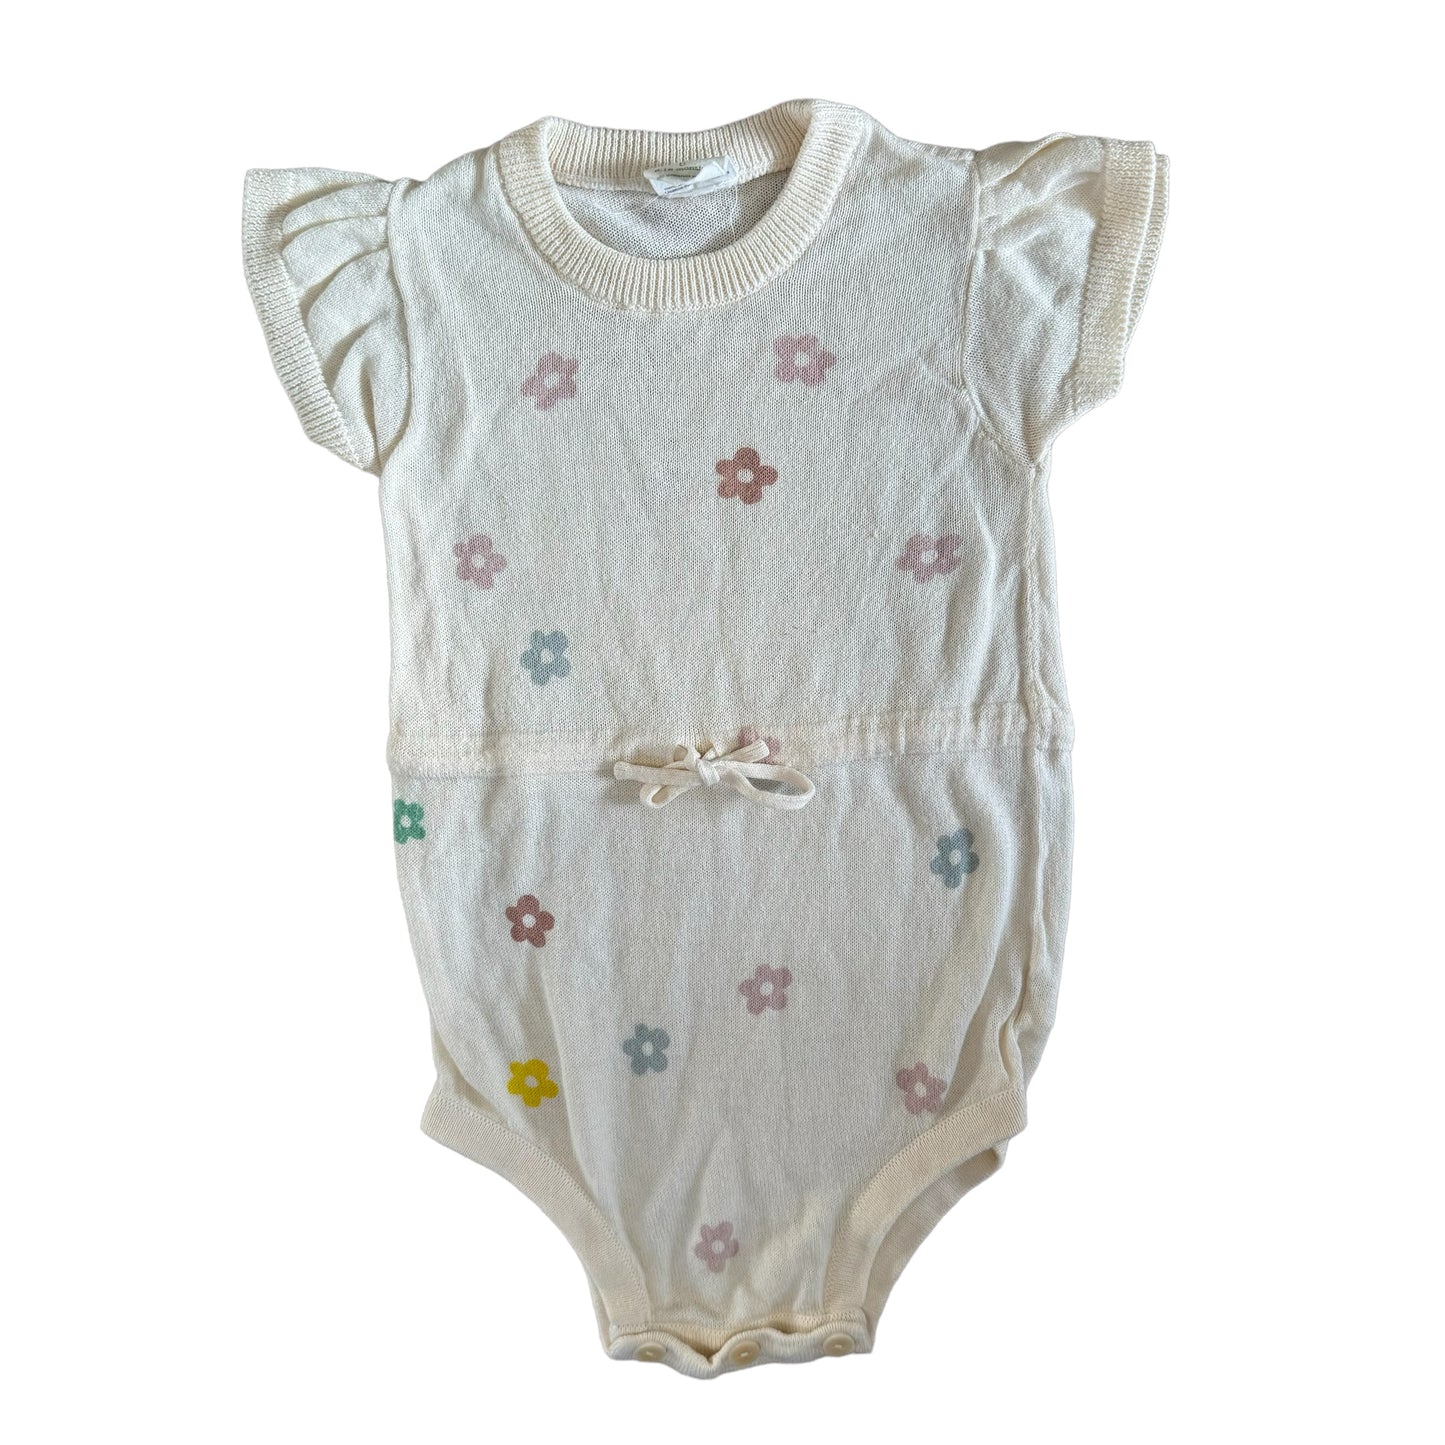 Nature Baby romper | Size: 6-12 months | EUC